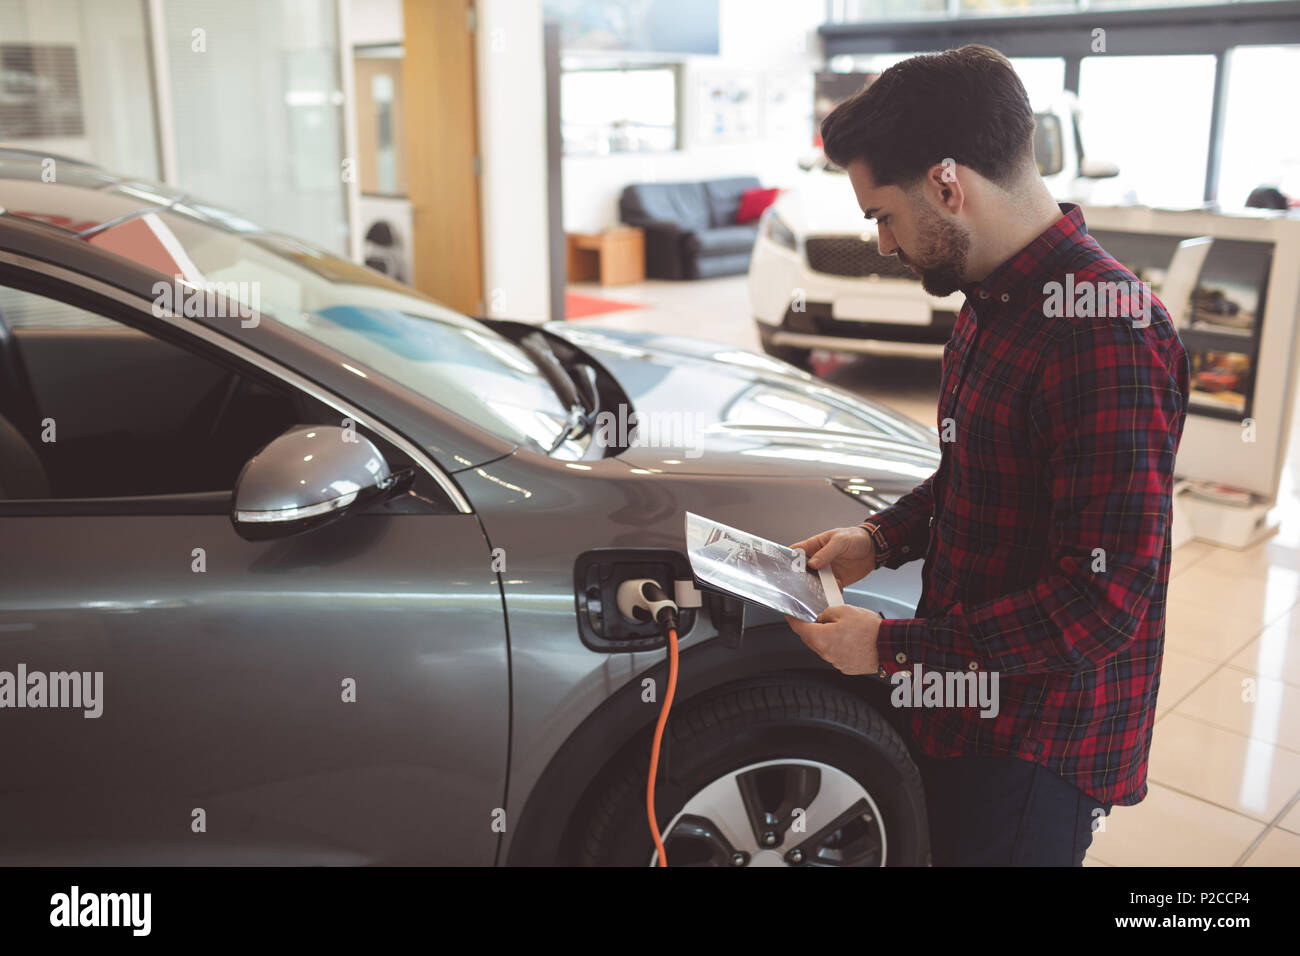 Salesman standing next to car and reading brochure Stock Photo